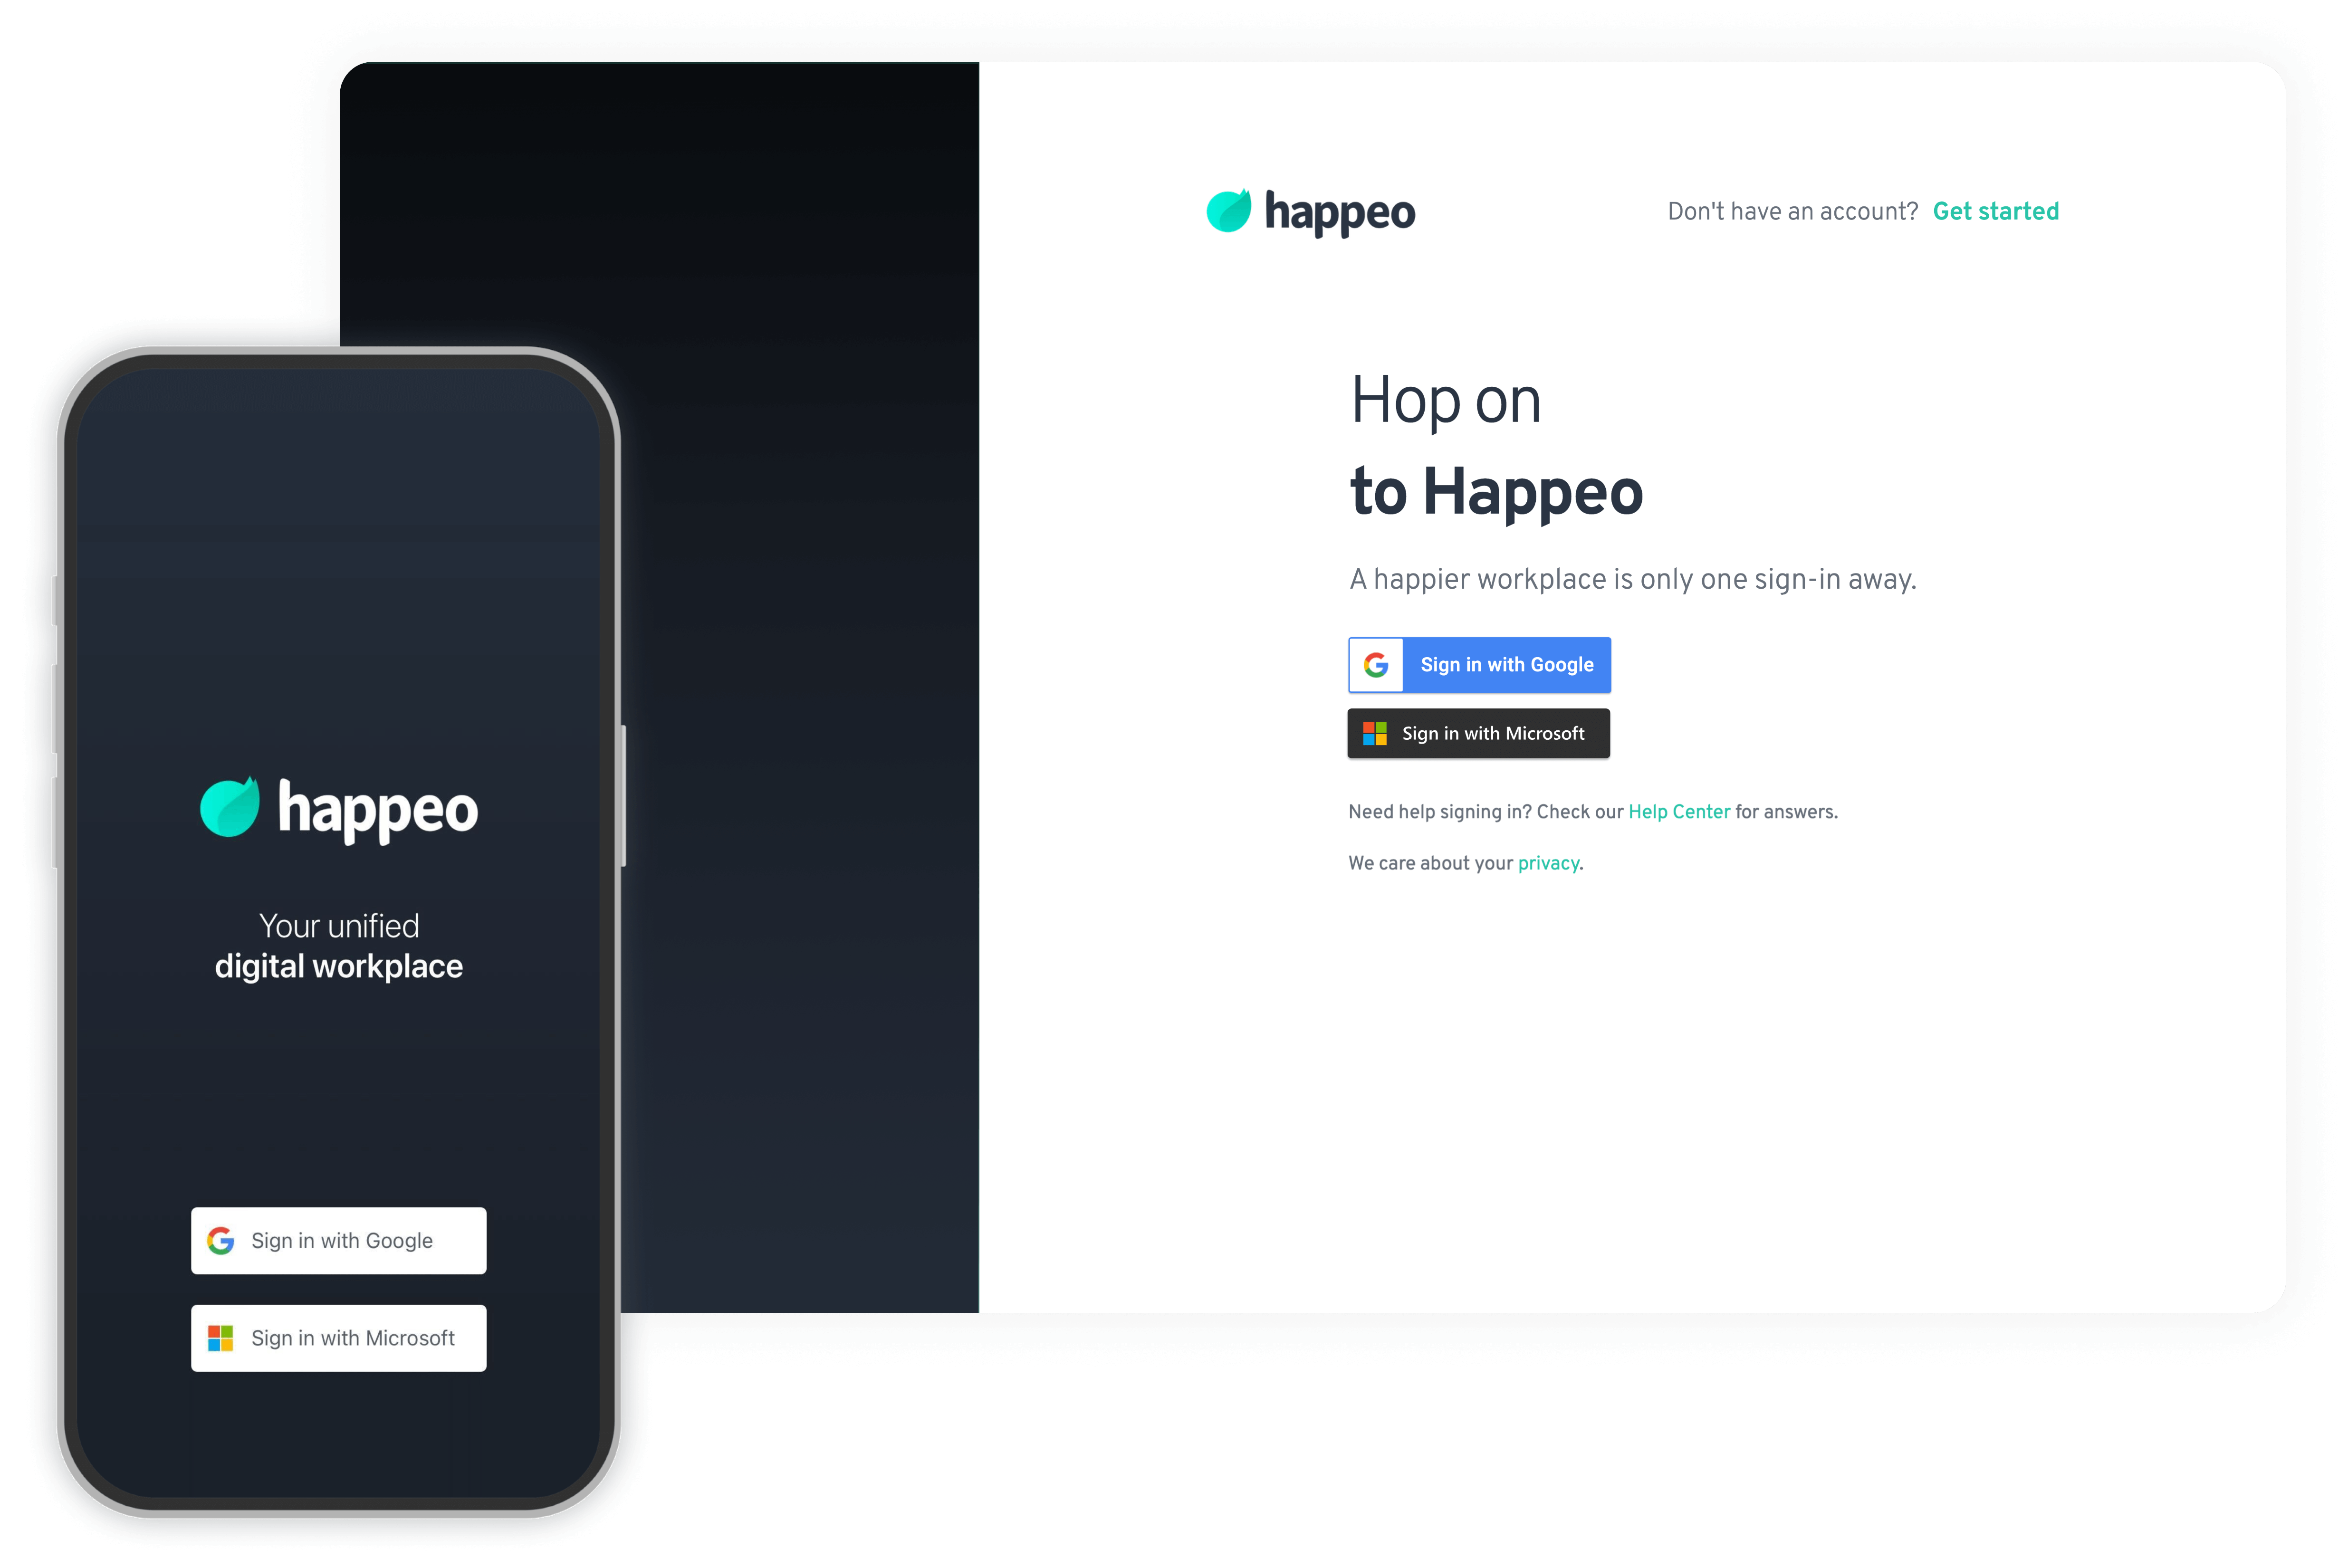 We’re making Happeo more consistent by adding a Microsoft 365 login button to the login page